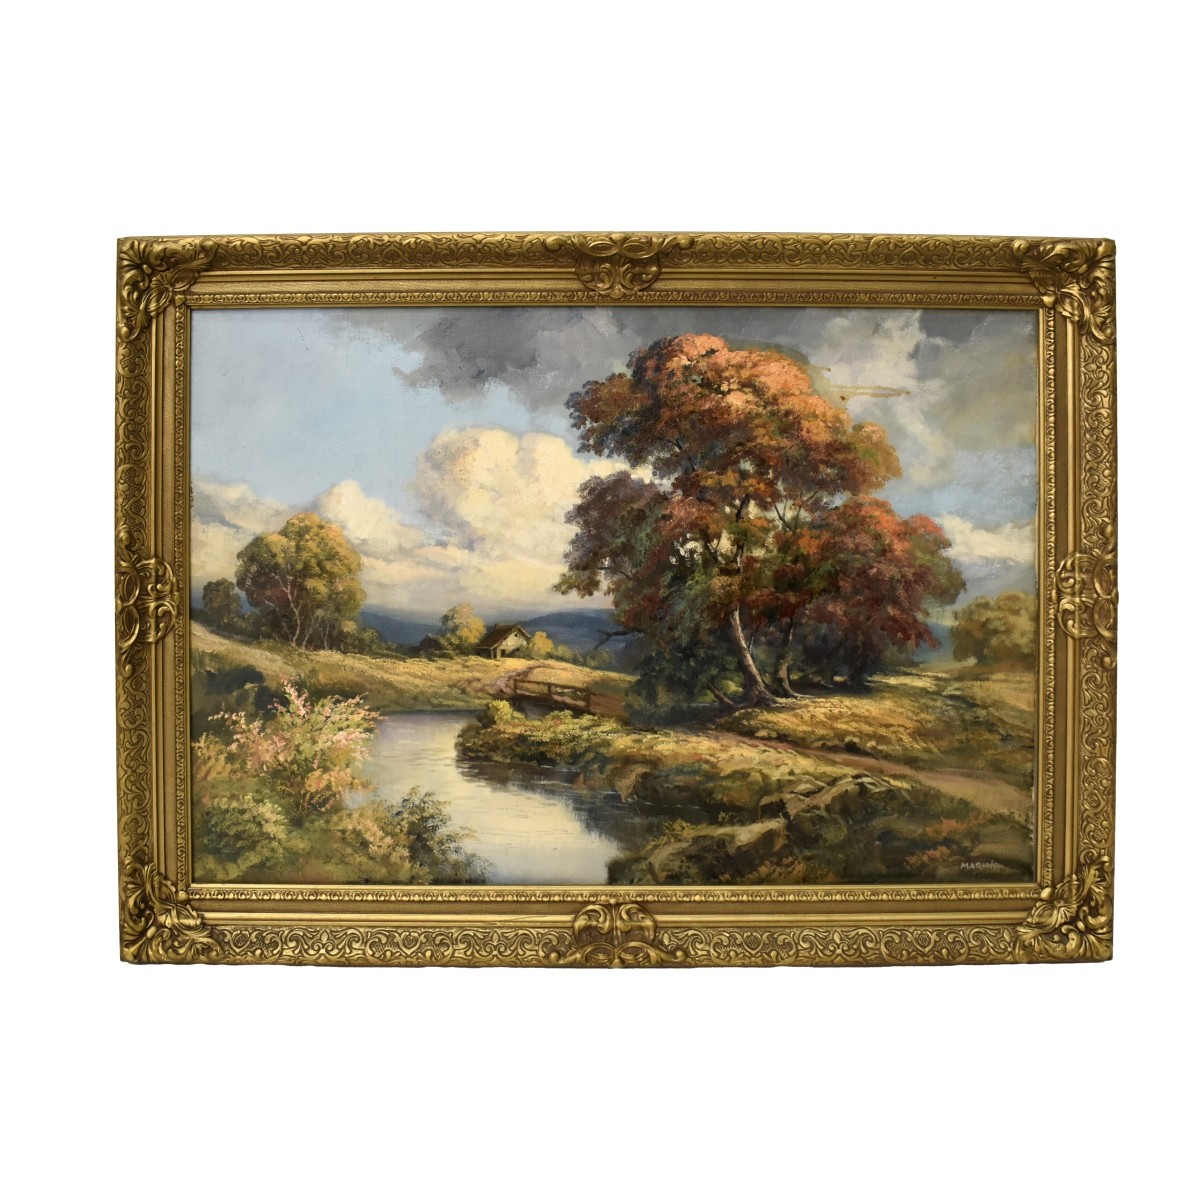 Oil on Canvas of a Landscape Scene